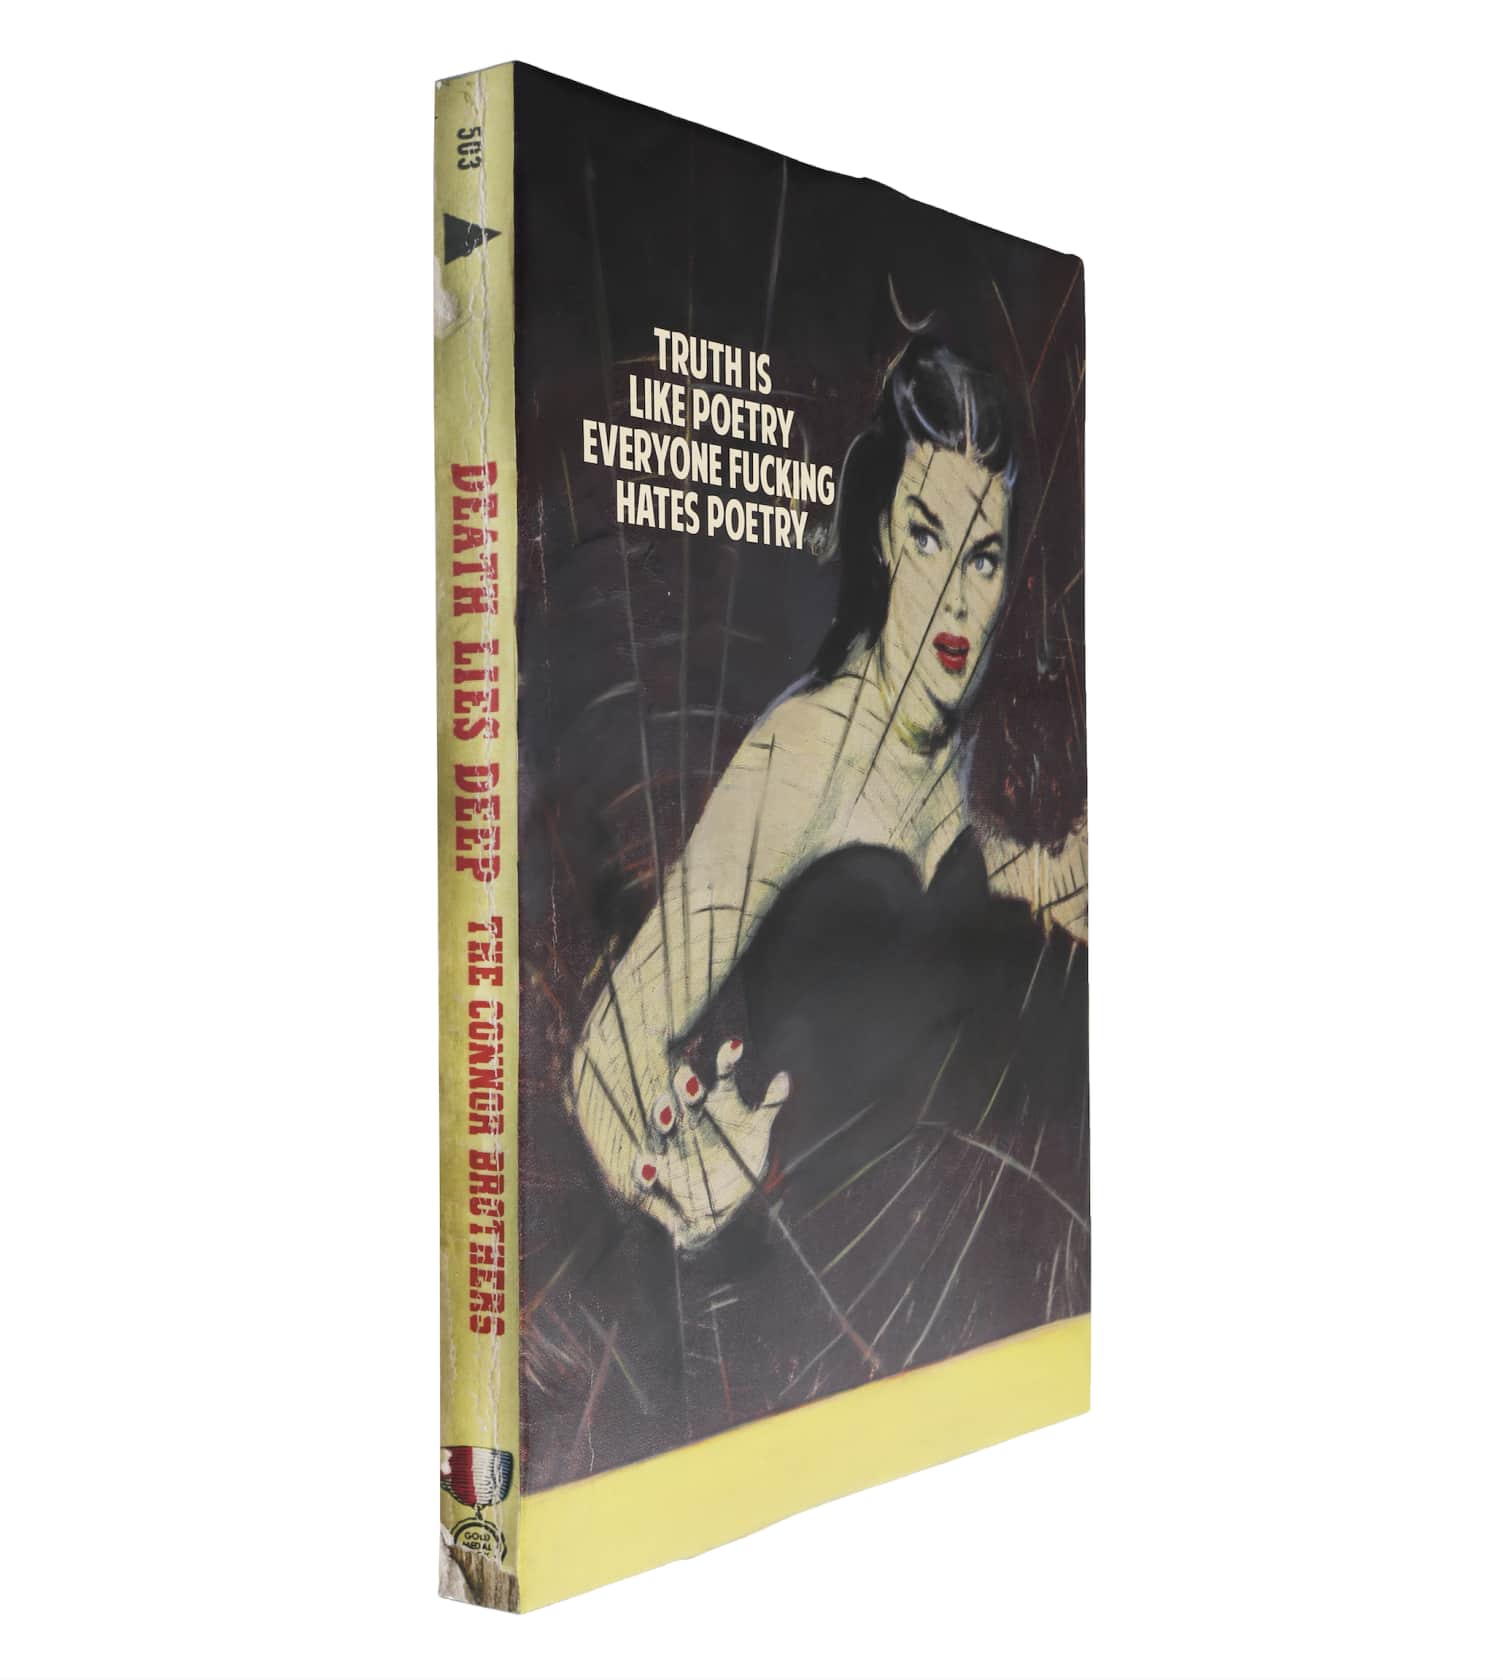 the connor brothers Truth Is Like Poetry Hand painted wooden book with silkscreen